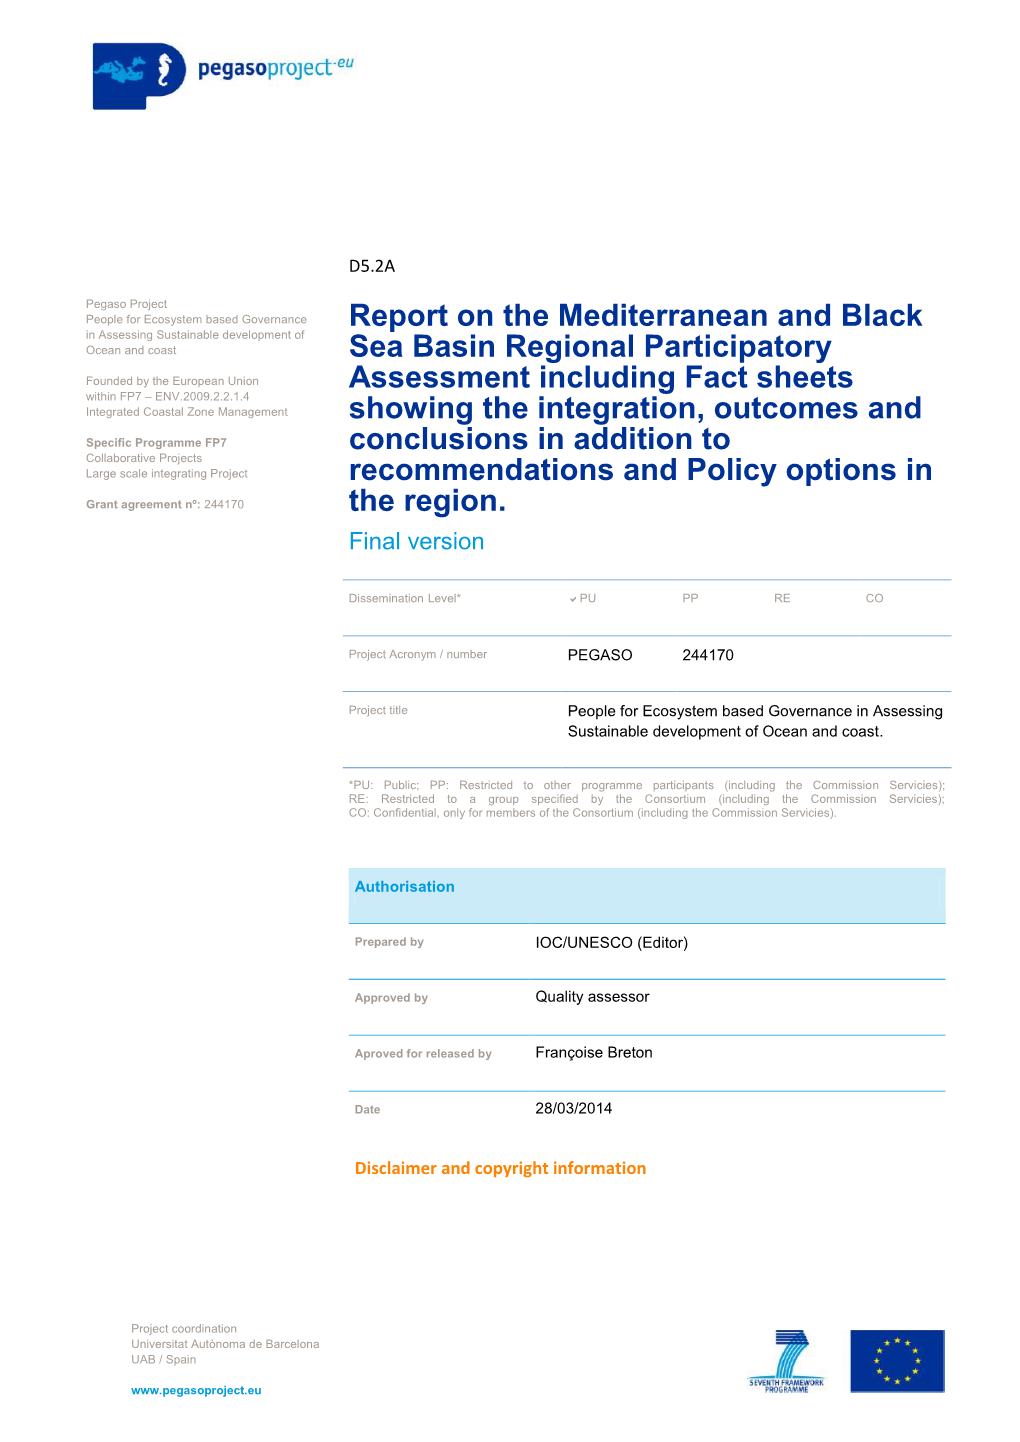 Report on the Mediterranean and Black Sea Basin Regional Participatory Assessment Including Fact Sheets Showing the Integration